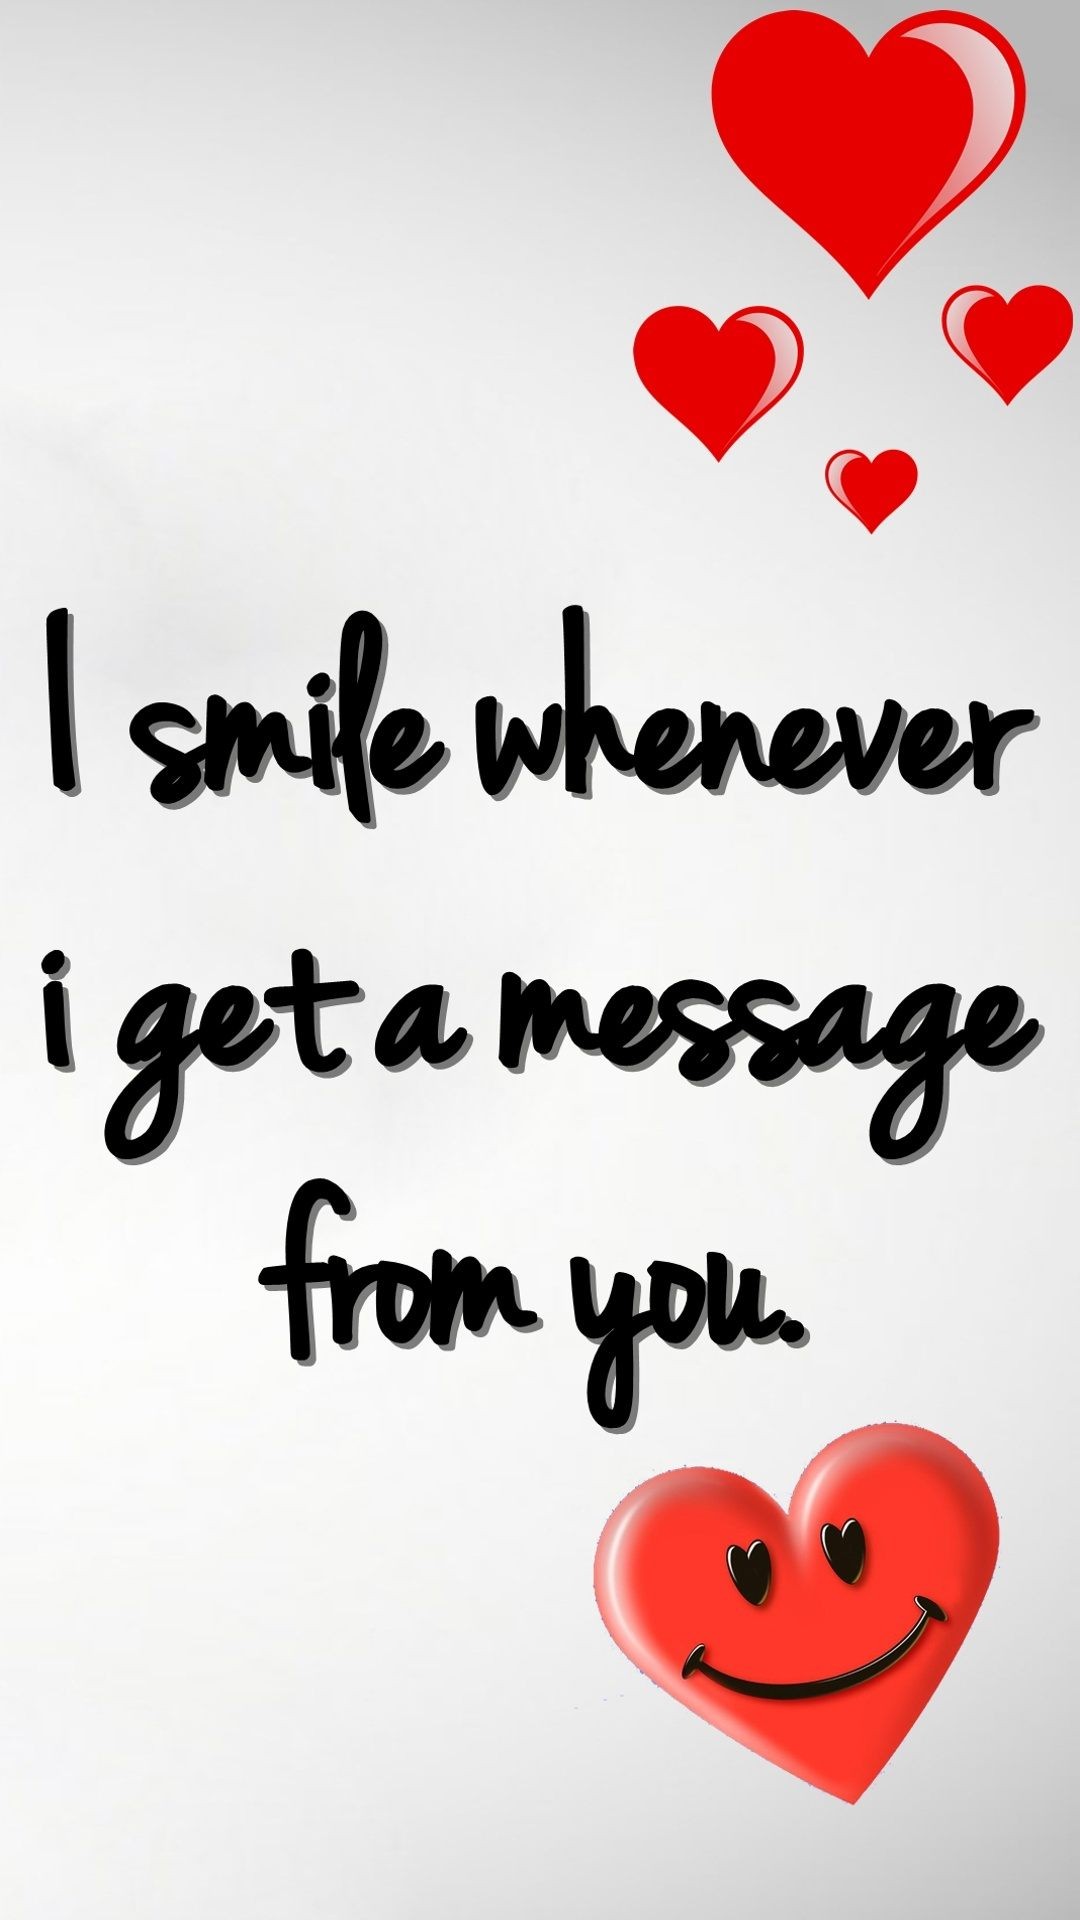 Smile Love Message Android wallpaper